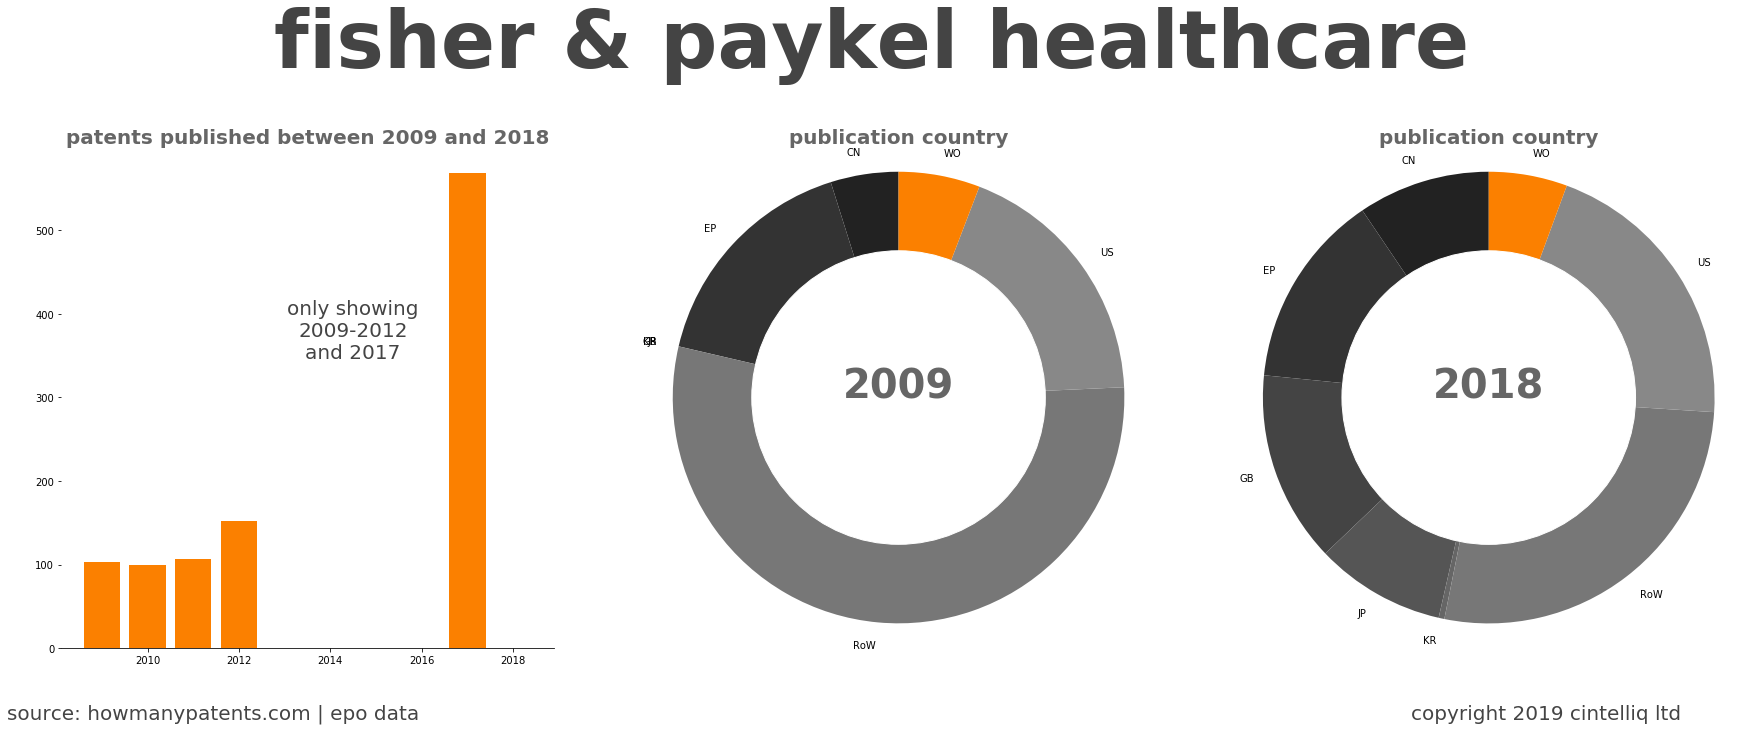 summary of patents for Fisher & Paykel Healthcare